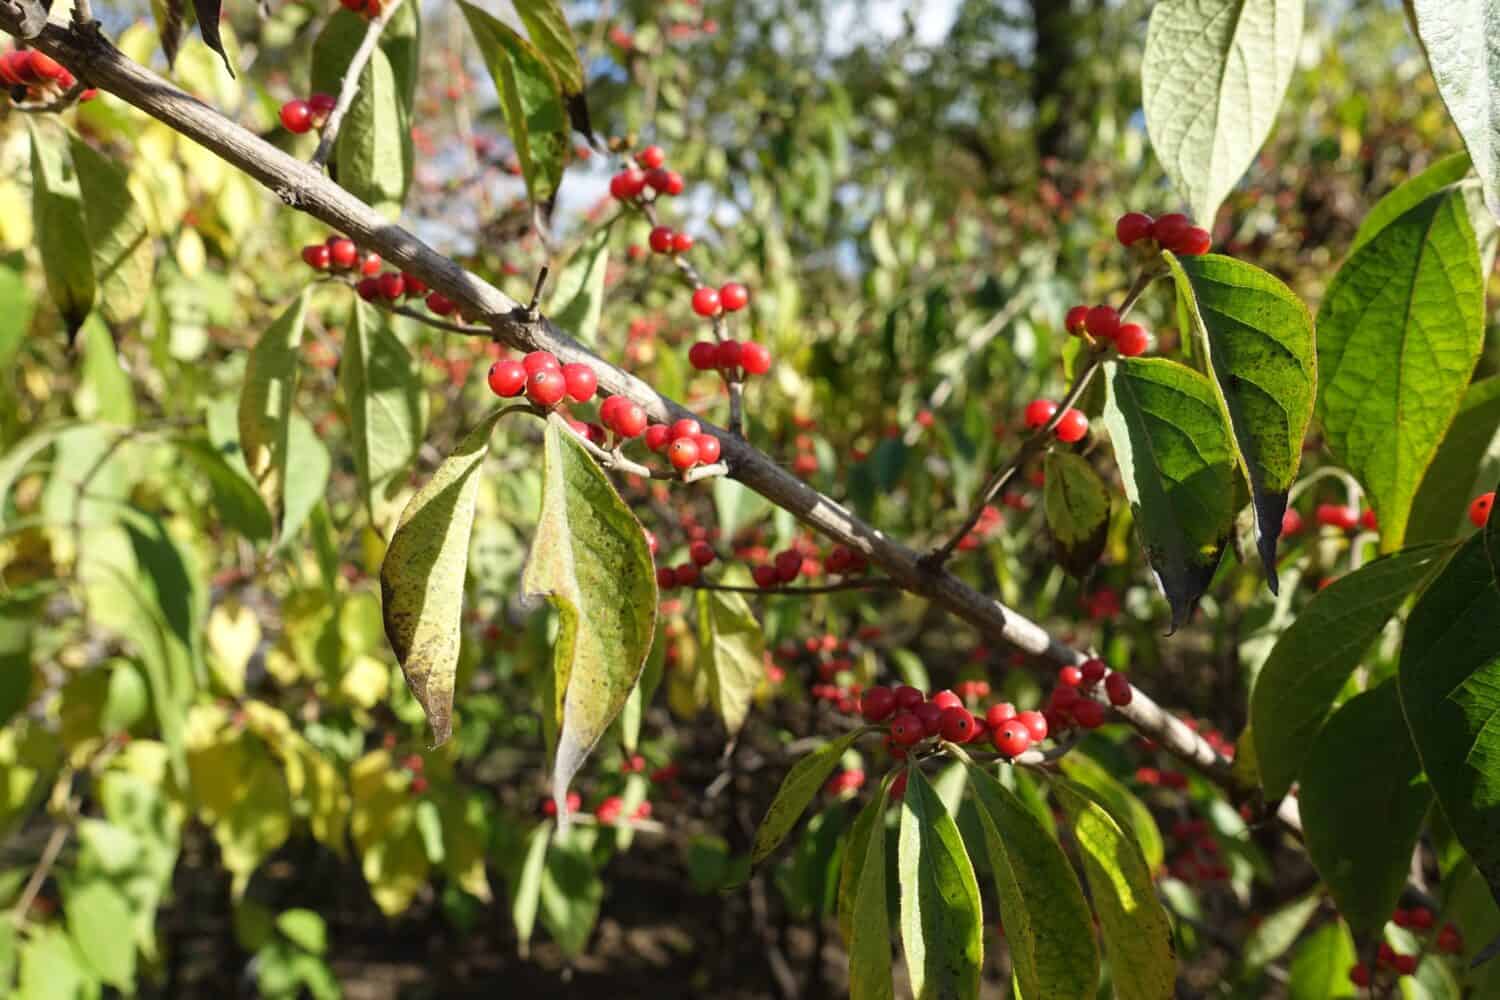 Thick branch of Amur honeysuckle with red berries in mid November